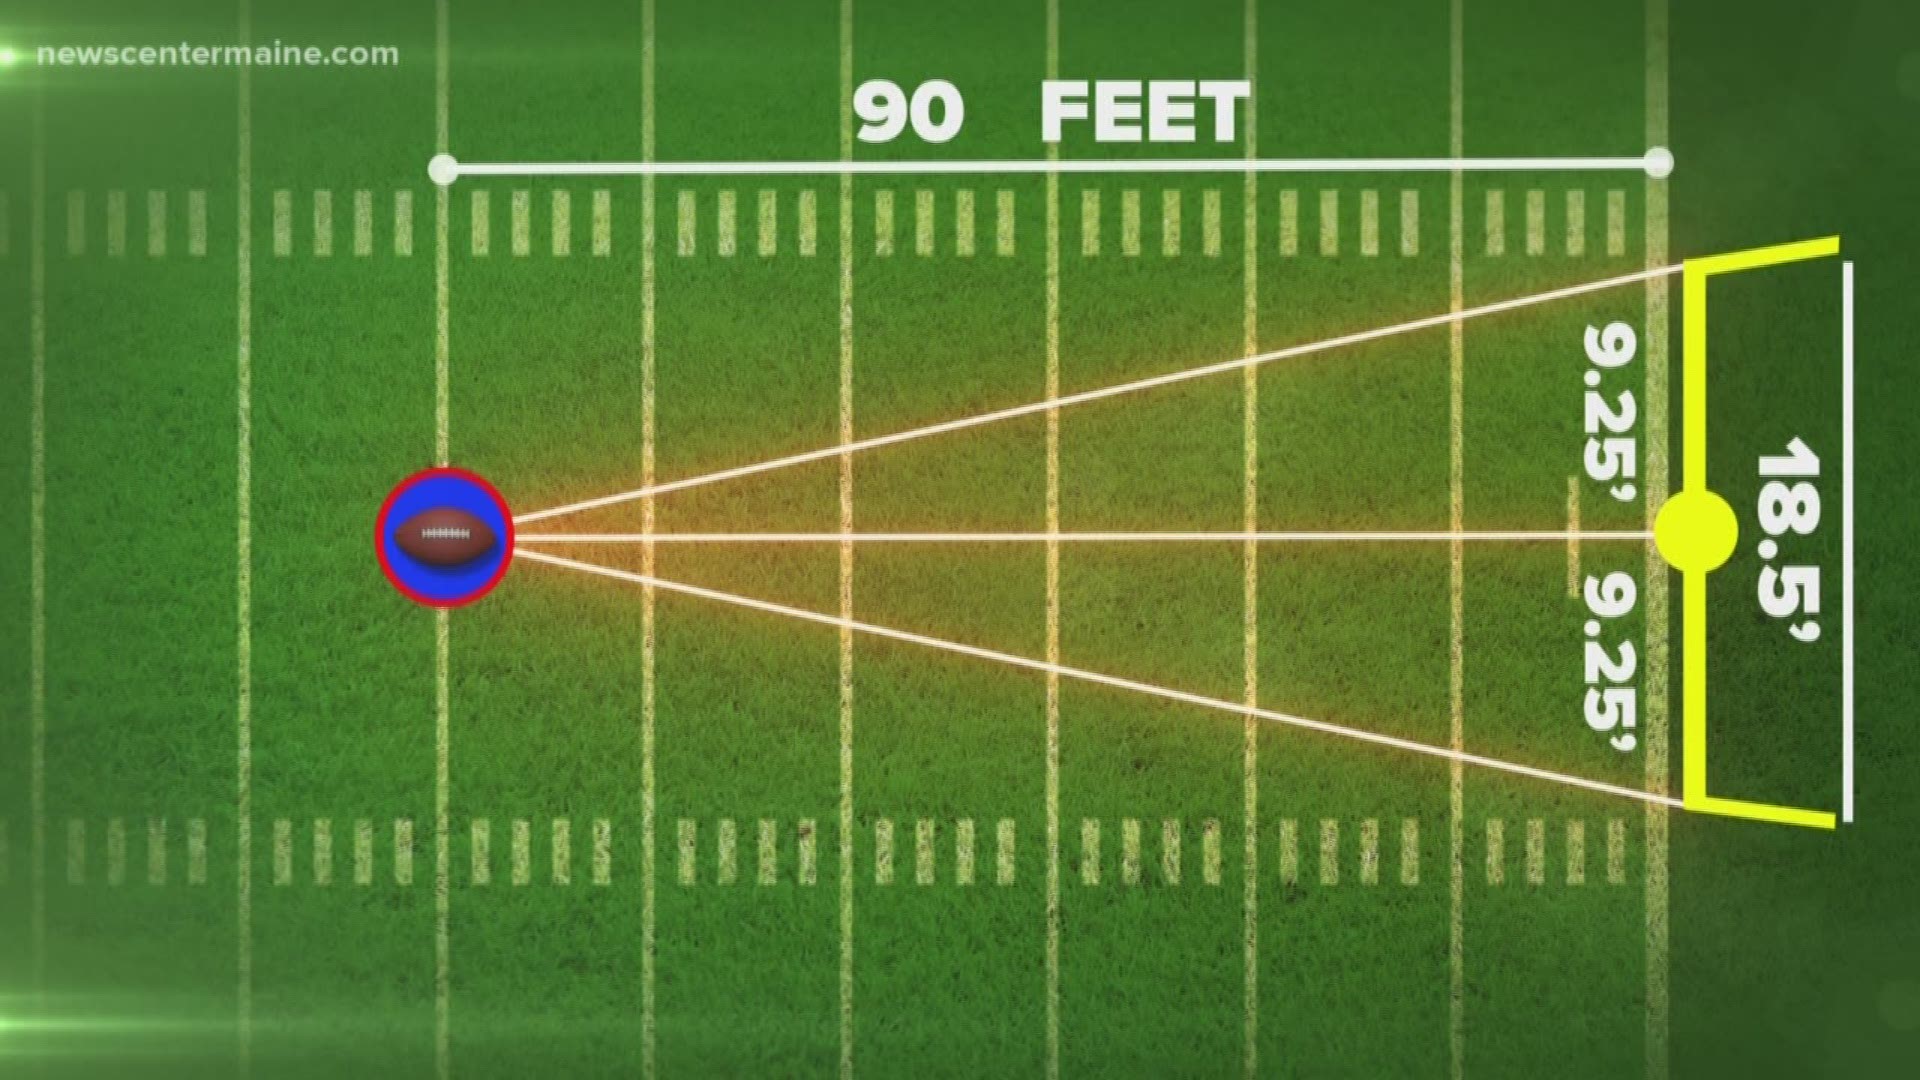 Keith Carson uses Super Bowl science to find out how hard it is to kick a field goal